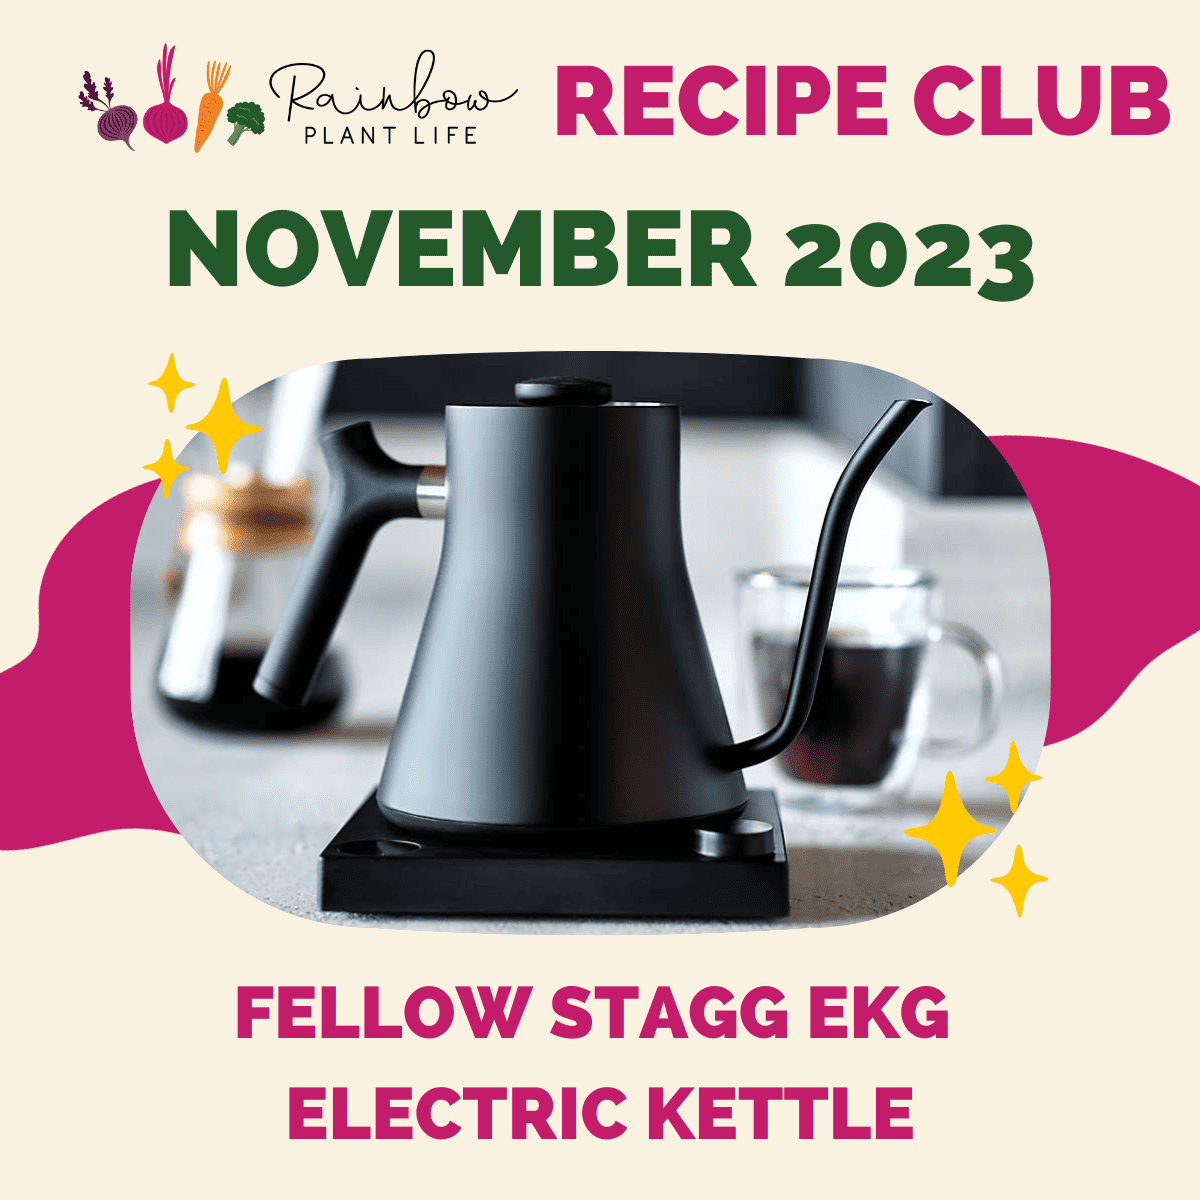 November recipe club prize graphic with stagg electric kettle.